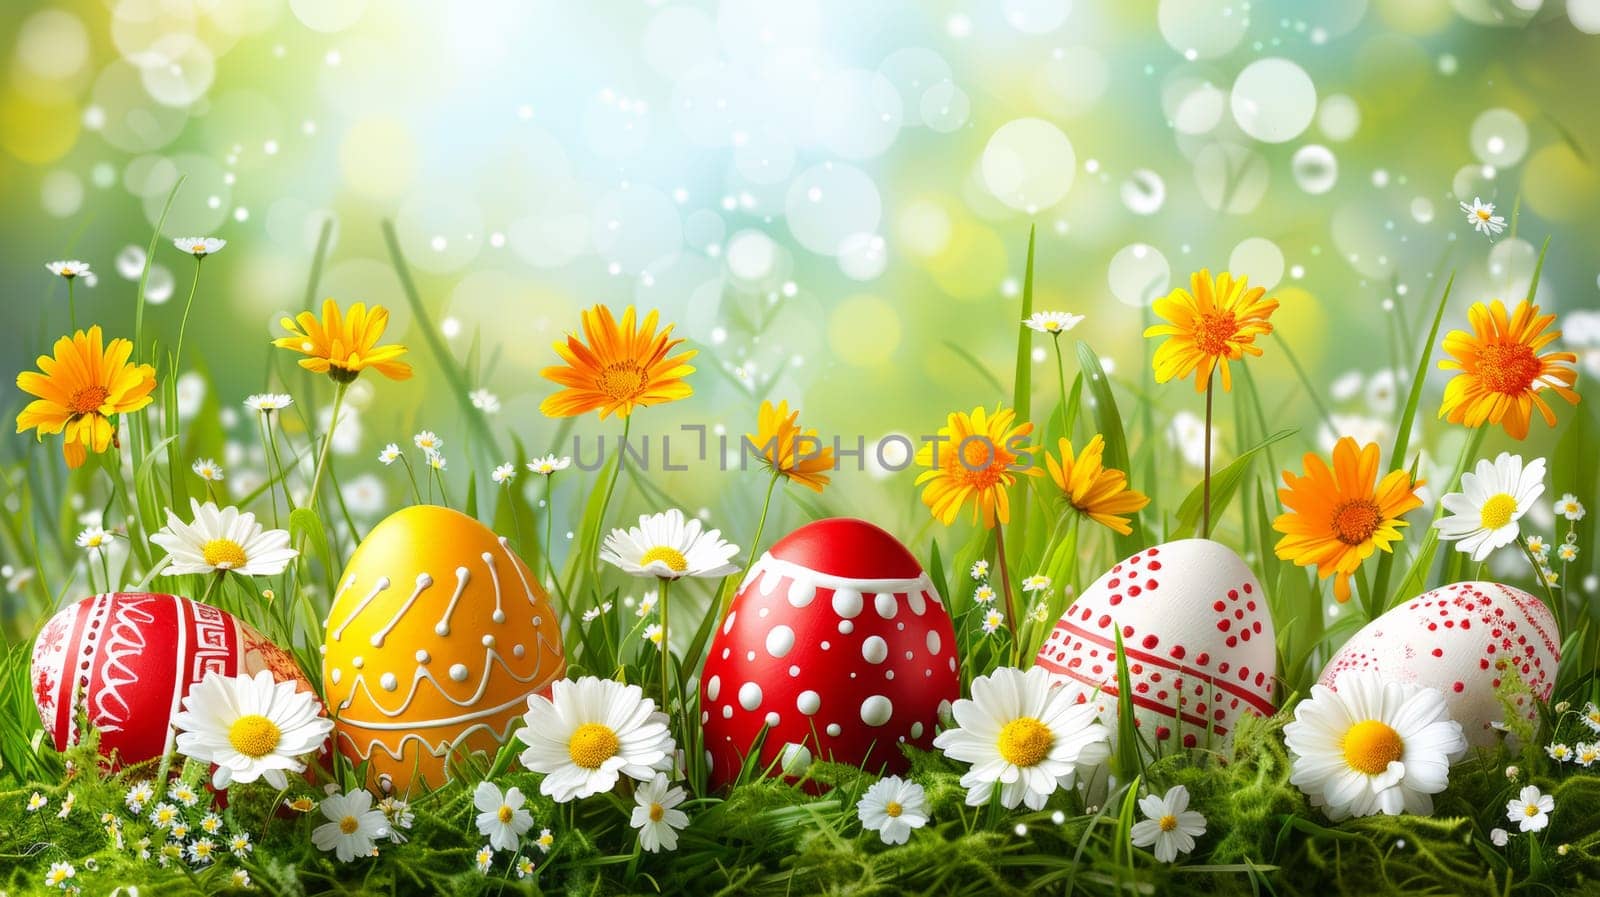 A group of easter eggs and daisies in a field